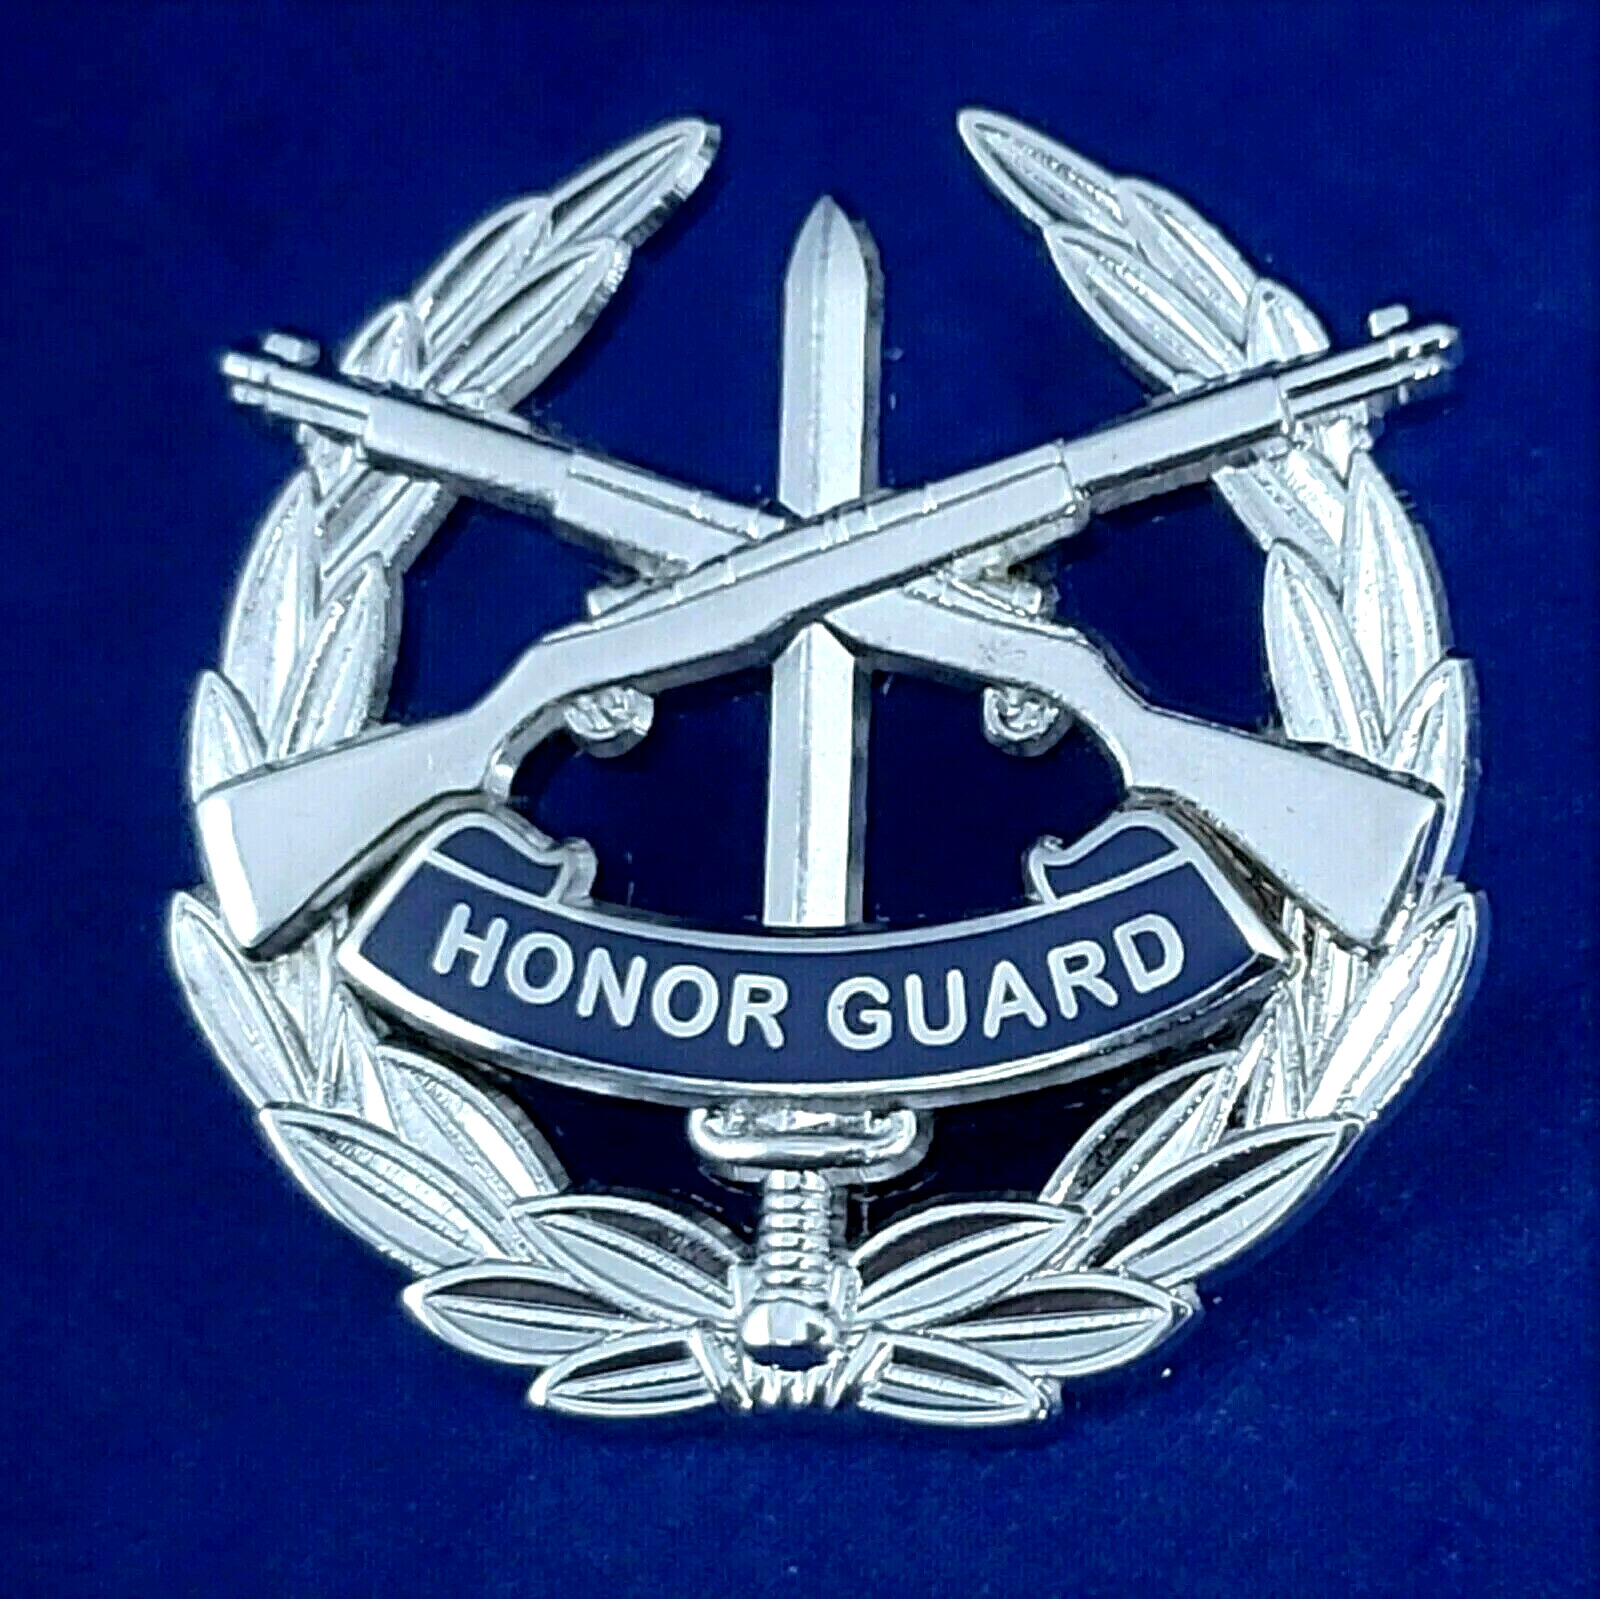 HONOR GUARD PIN, CROSS RIFLE-SWORD- LEAF   Item #118 OUT OF STOCK